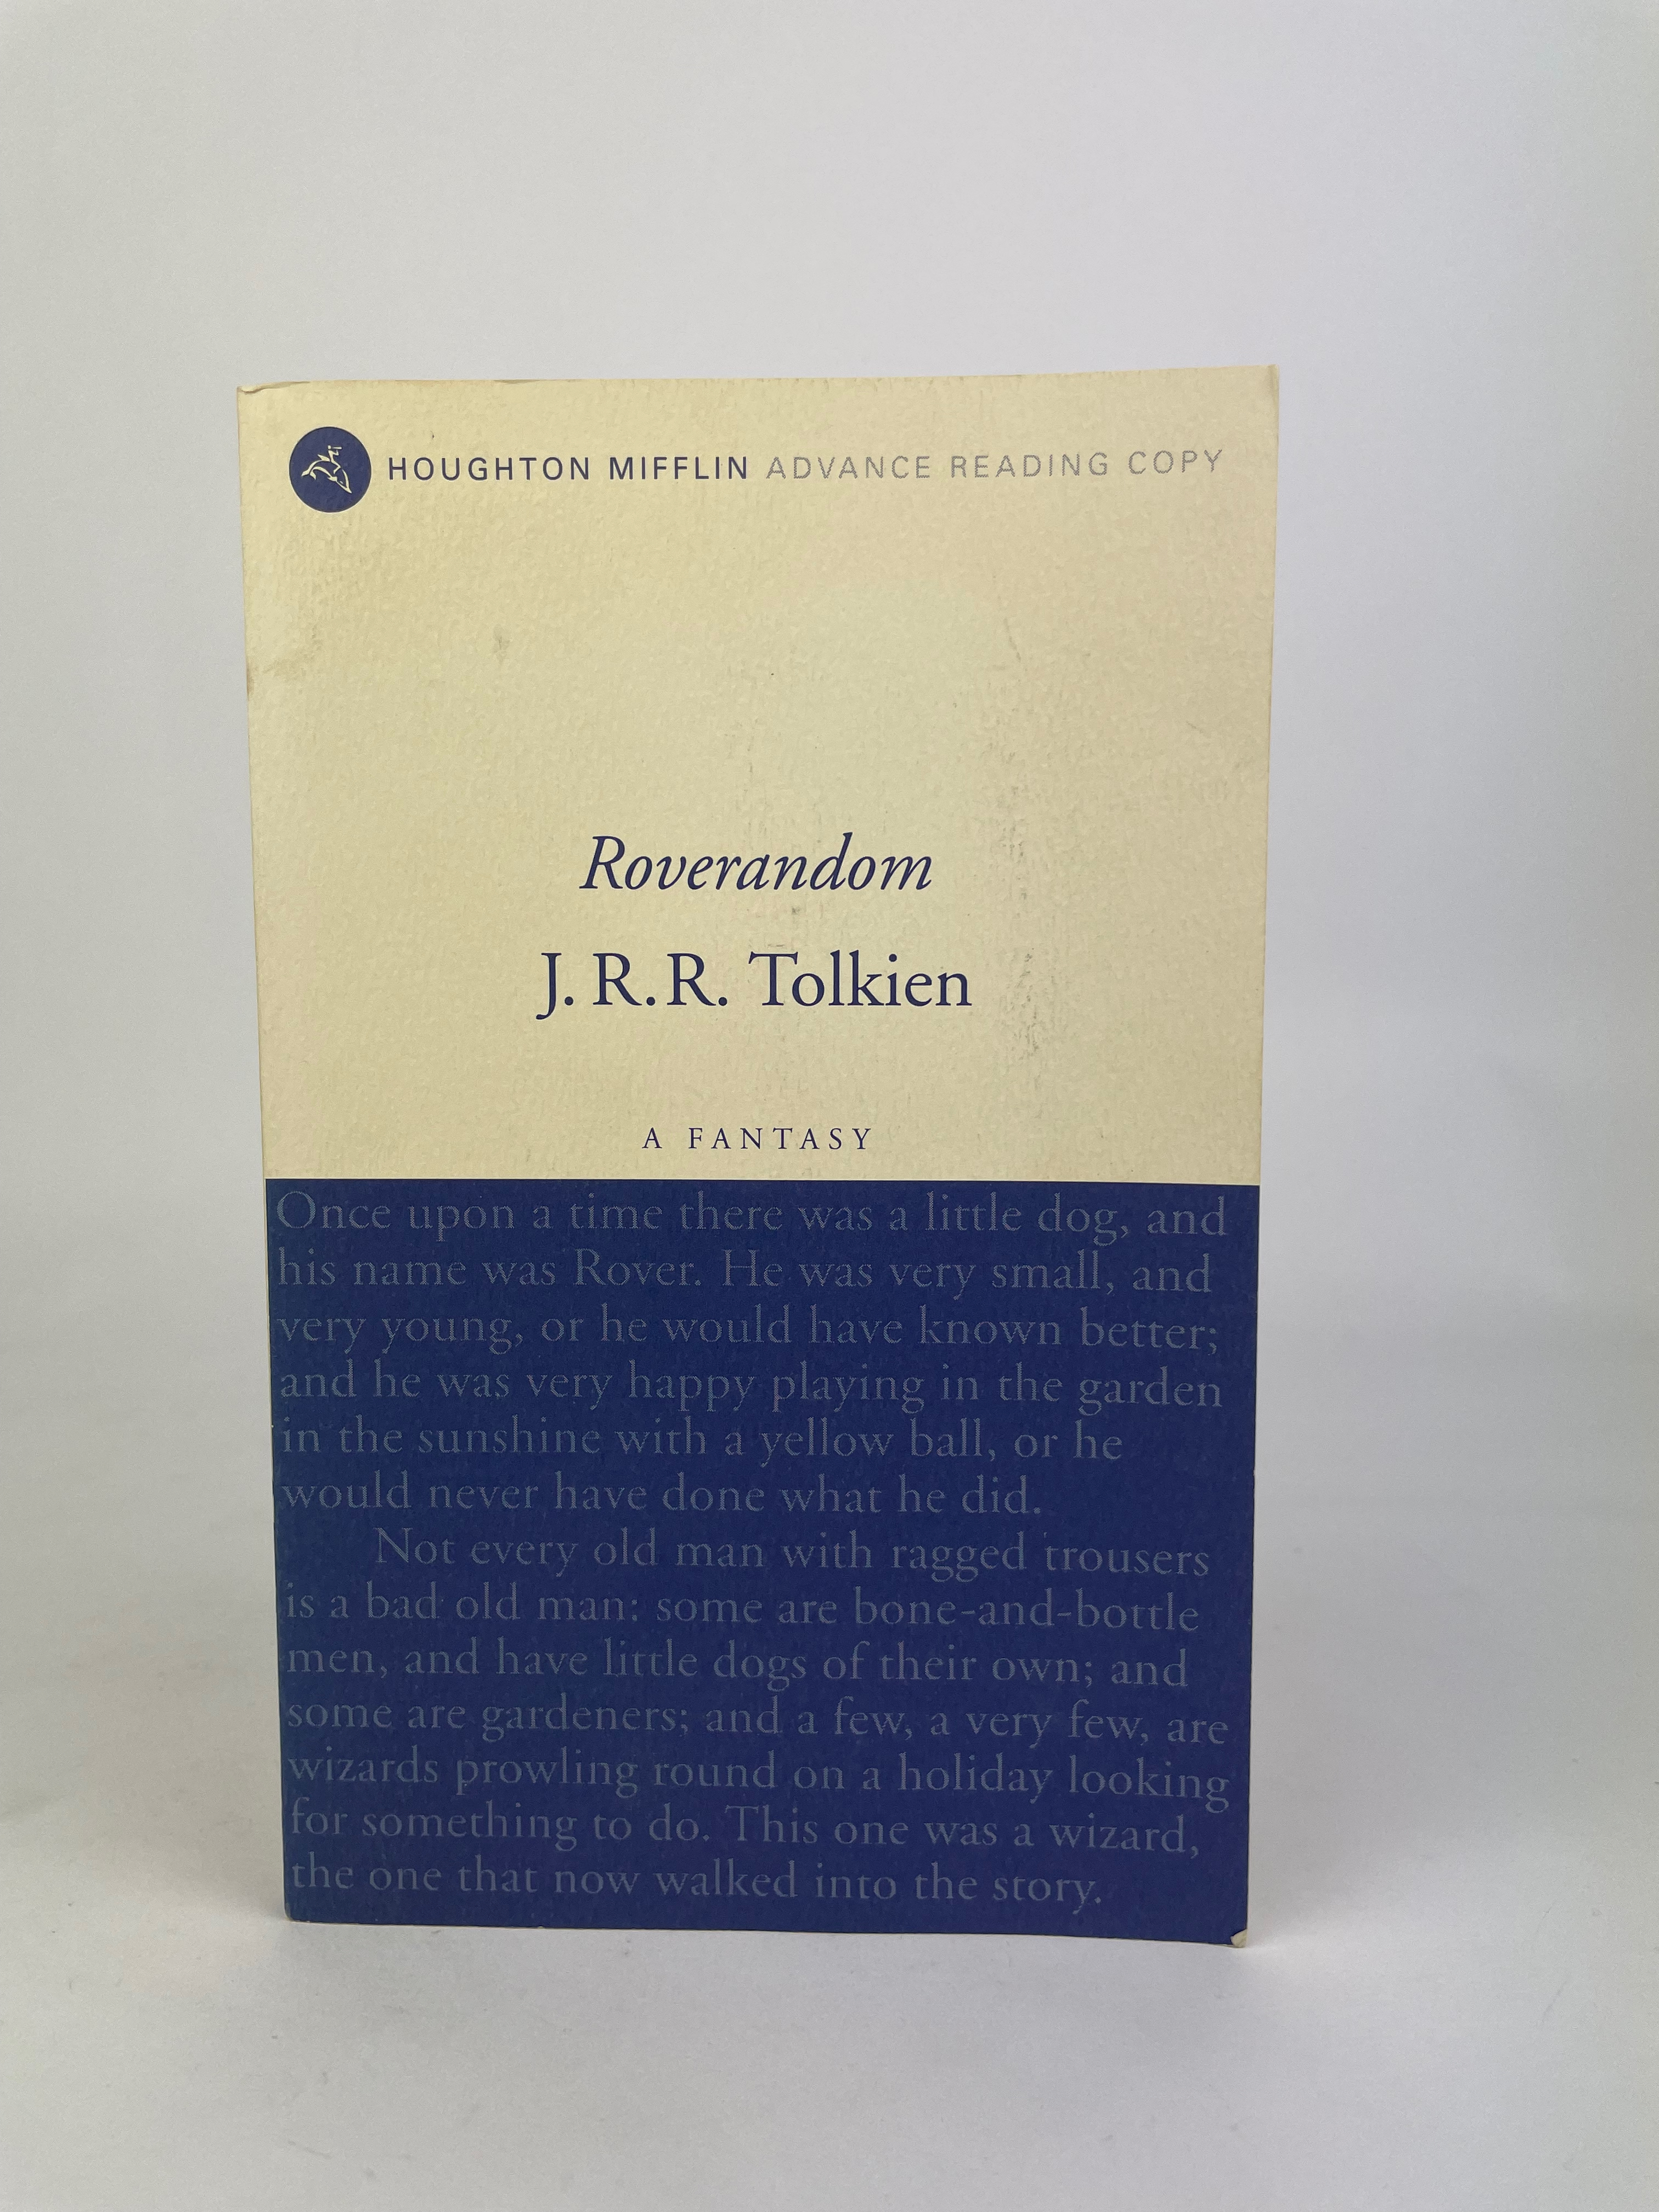 Advance Uncorrected Proof of Roverandom by J.R.R. Tolkien